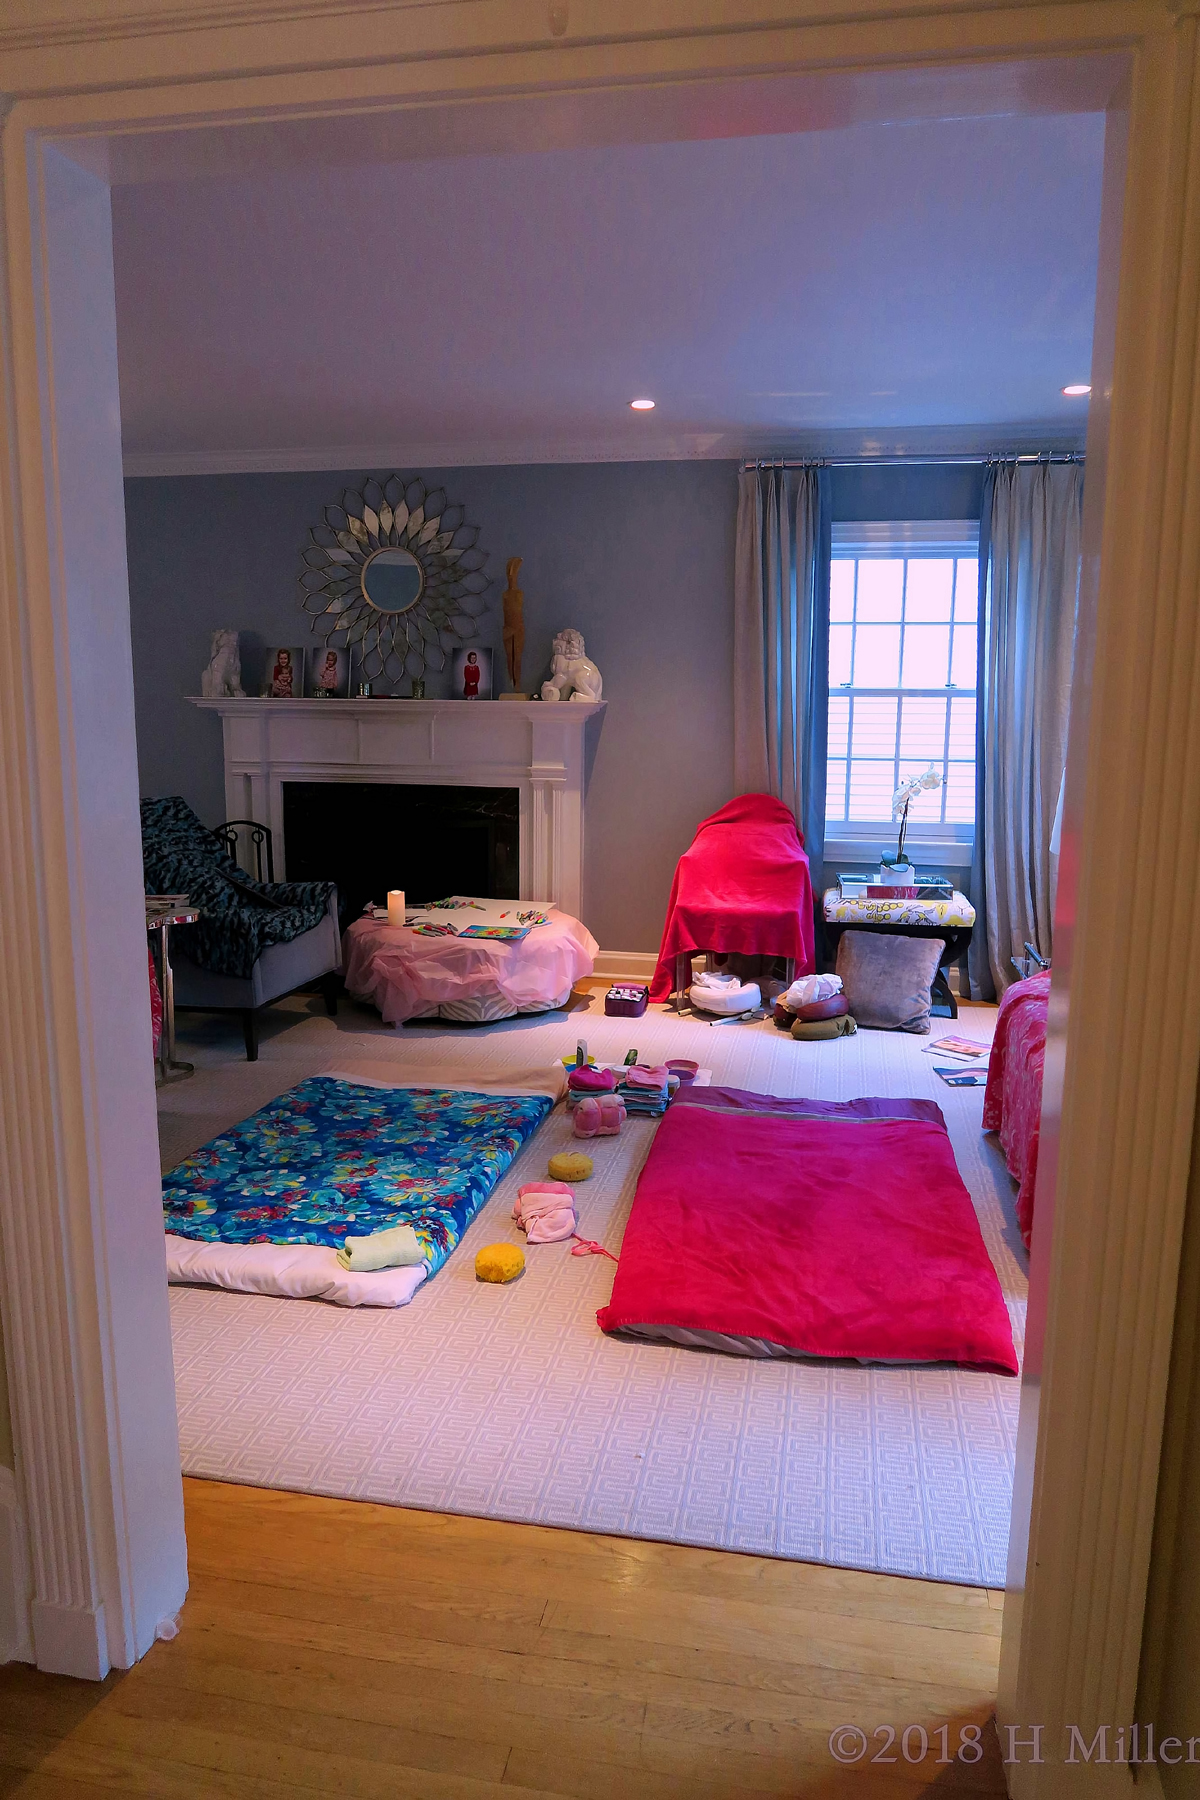 Facial Mats, Comfy Couch And All That Is Required For A Perfect Kids Spa! 